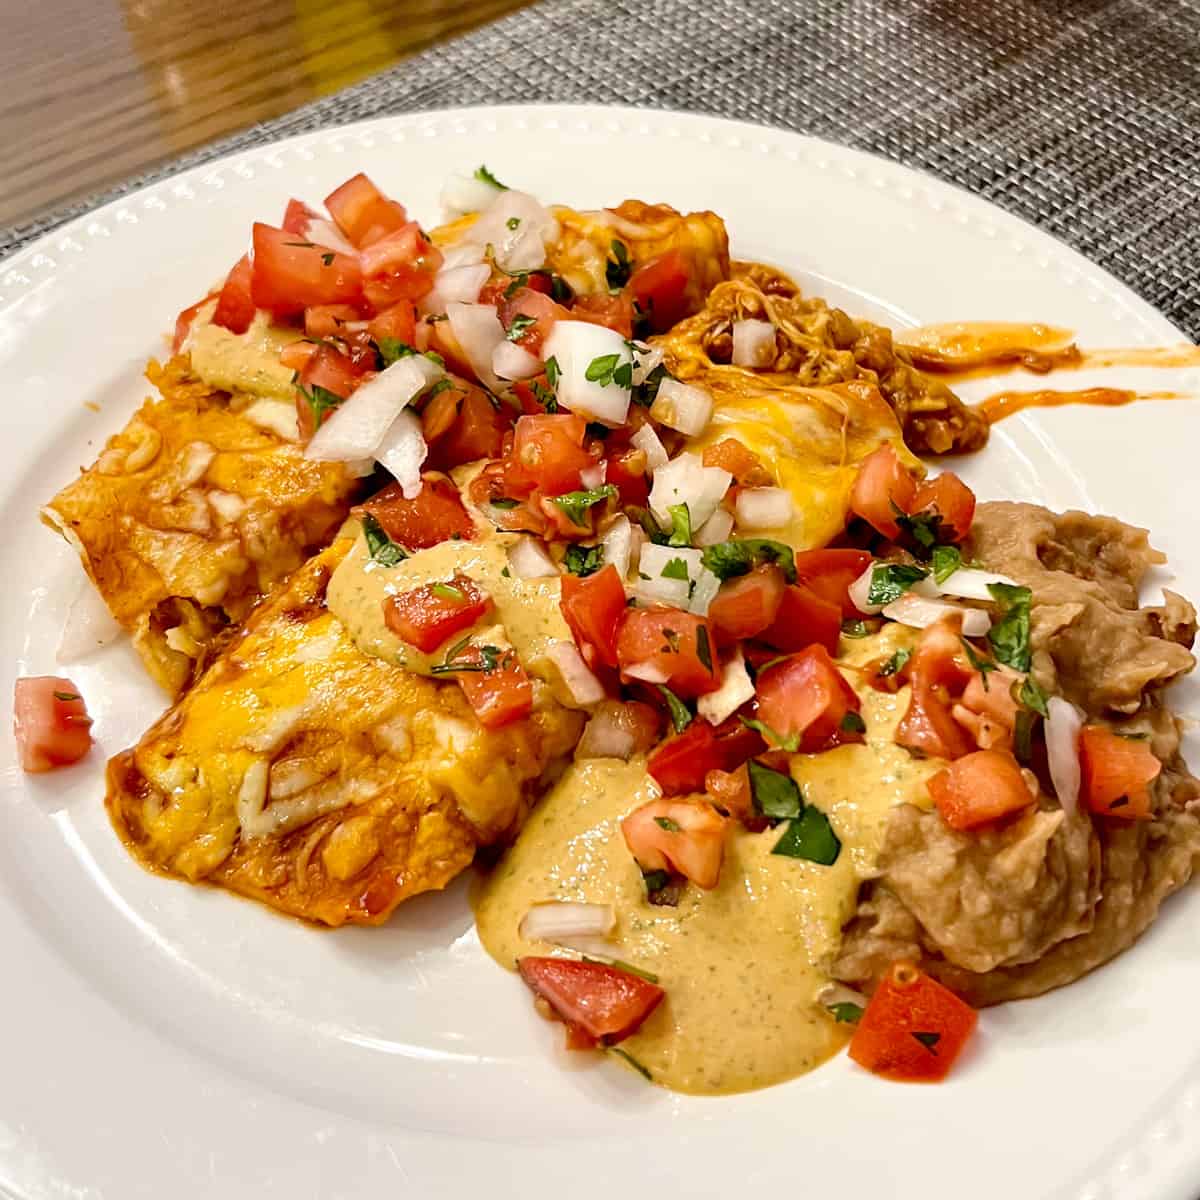 Baked enchiladas on a plate with pico de Gallo, refried beans and sauce.